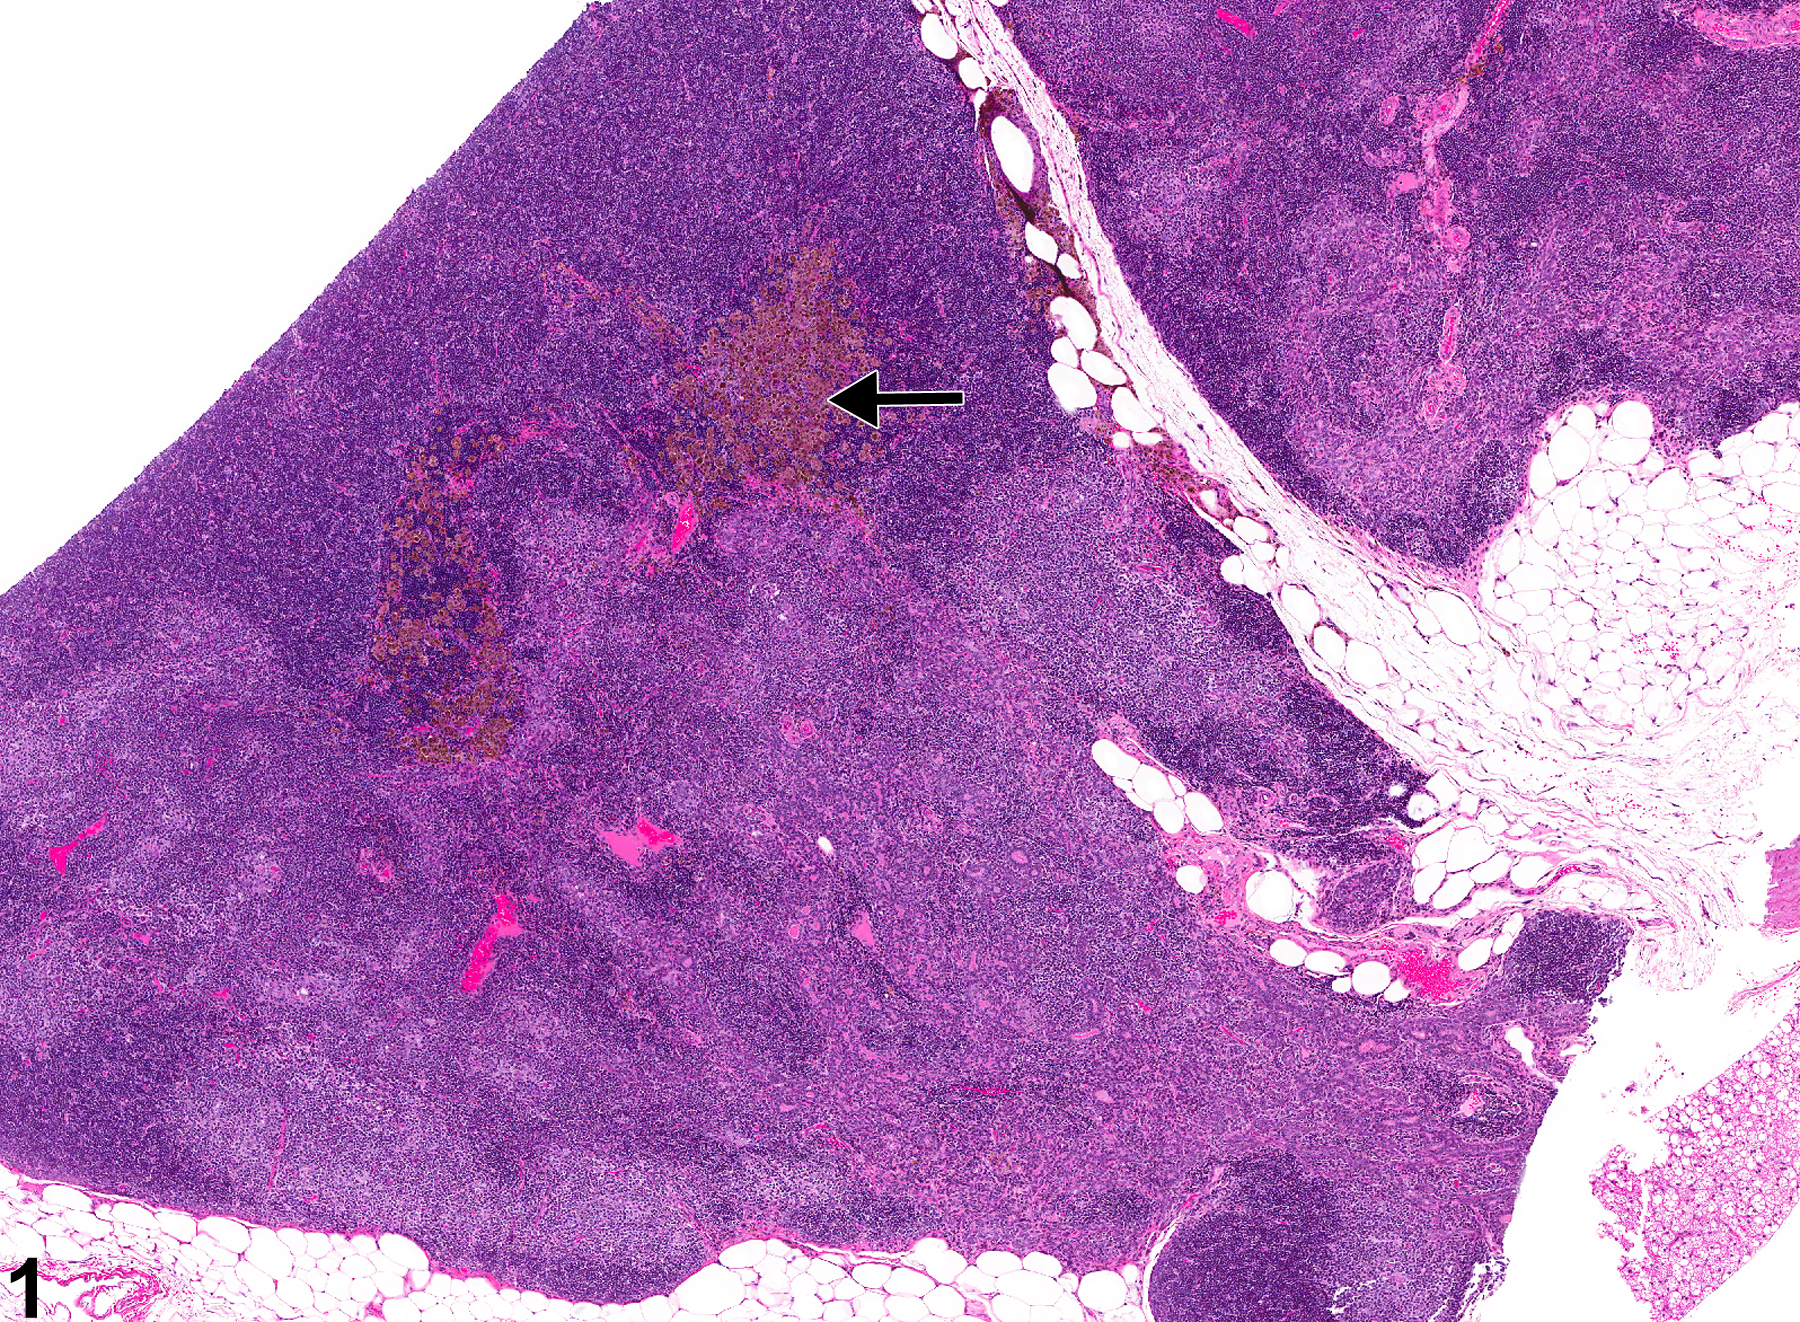 Image of pigment in the thymus from a female F344/N rat in a chronic study